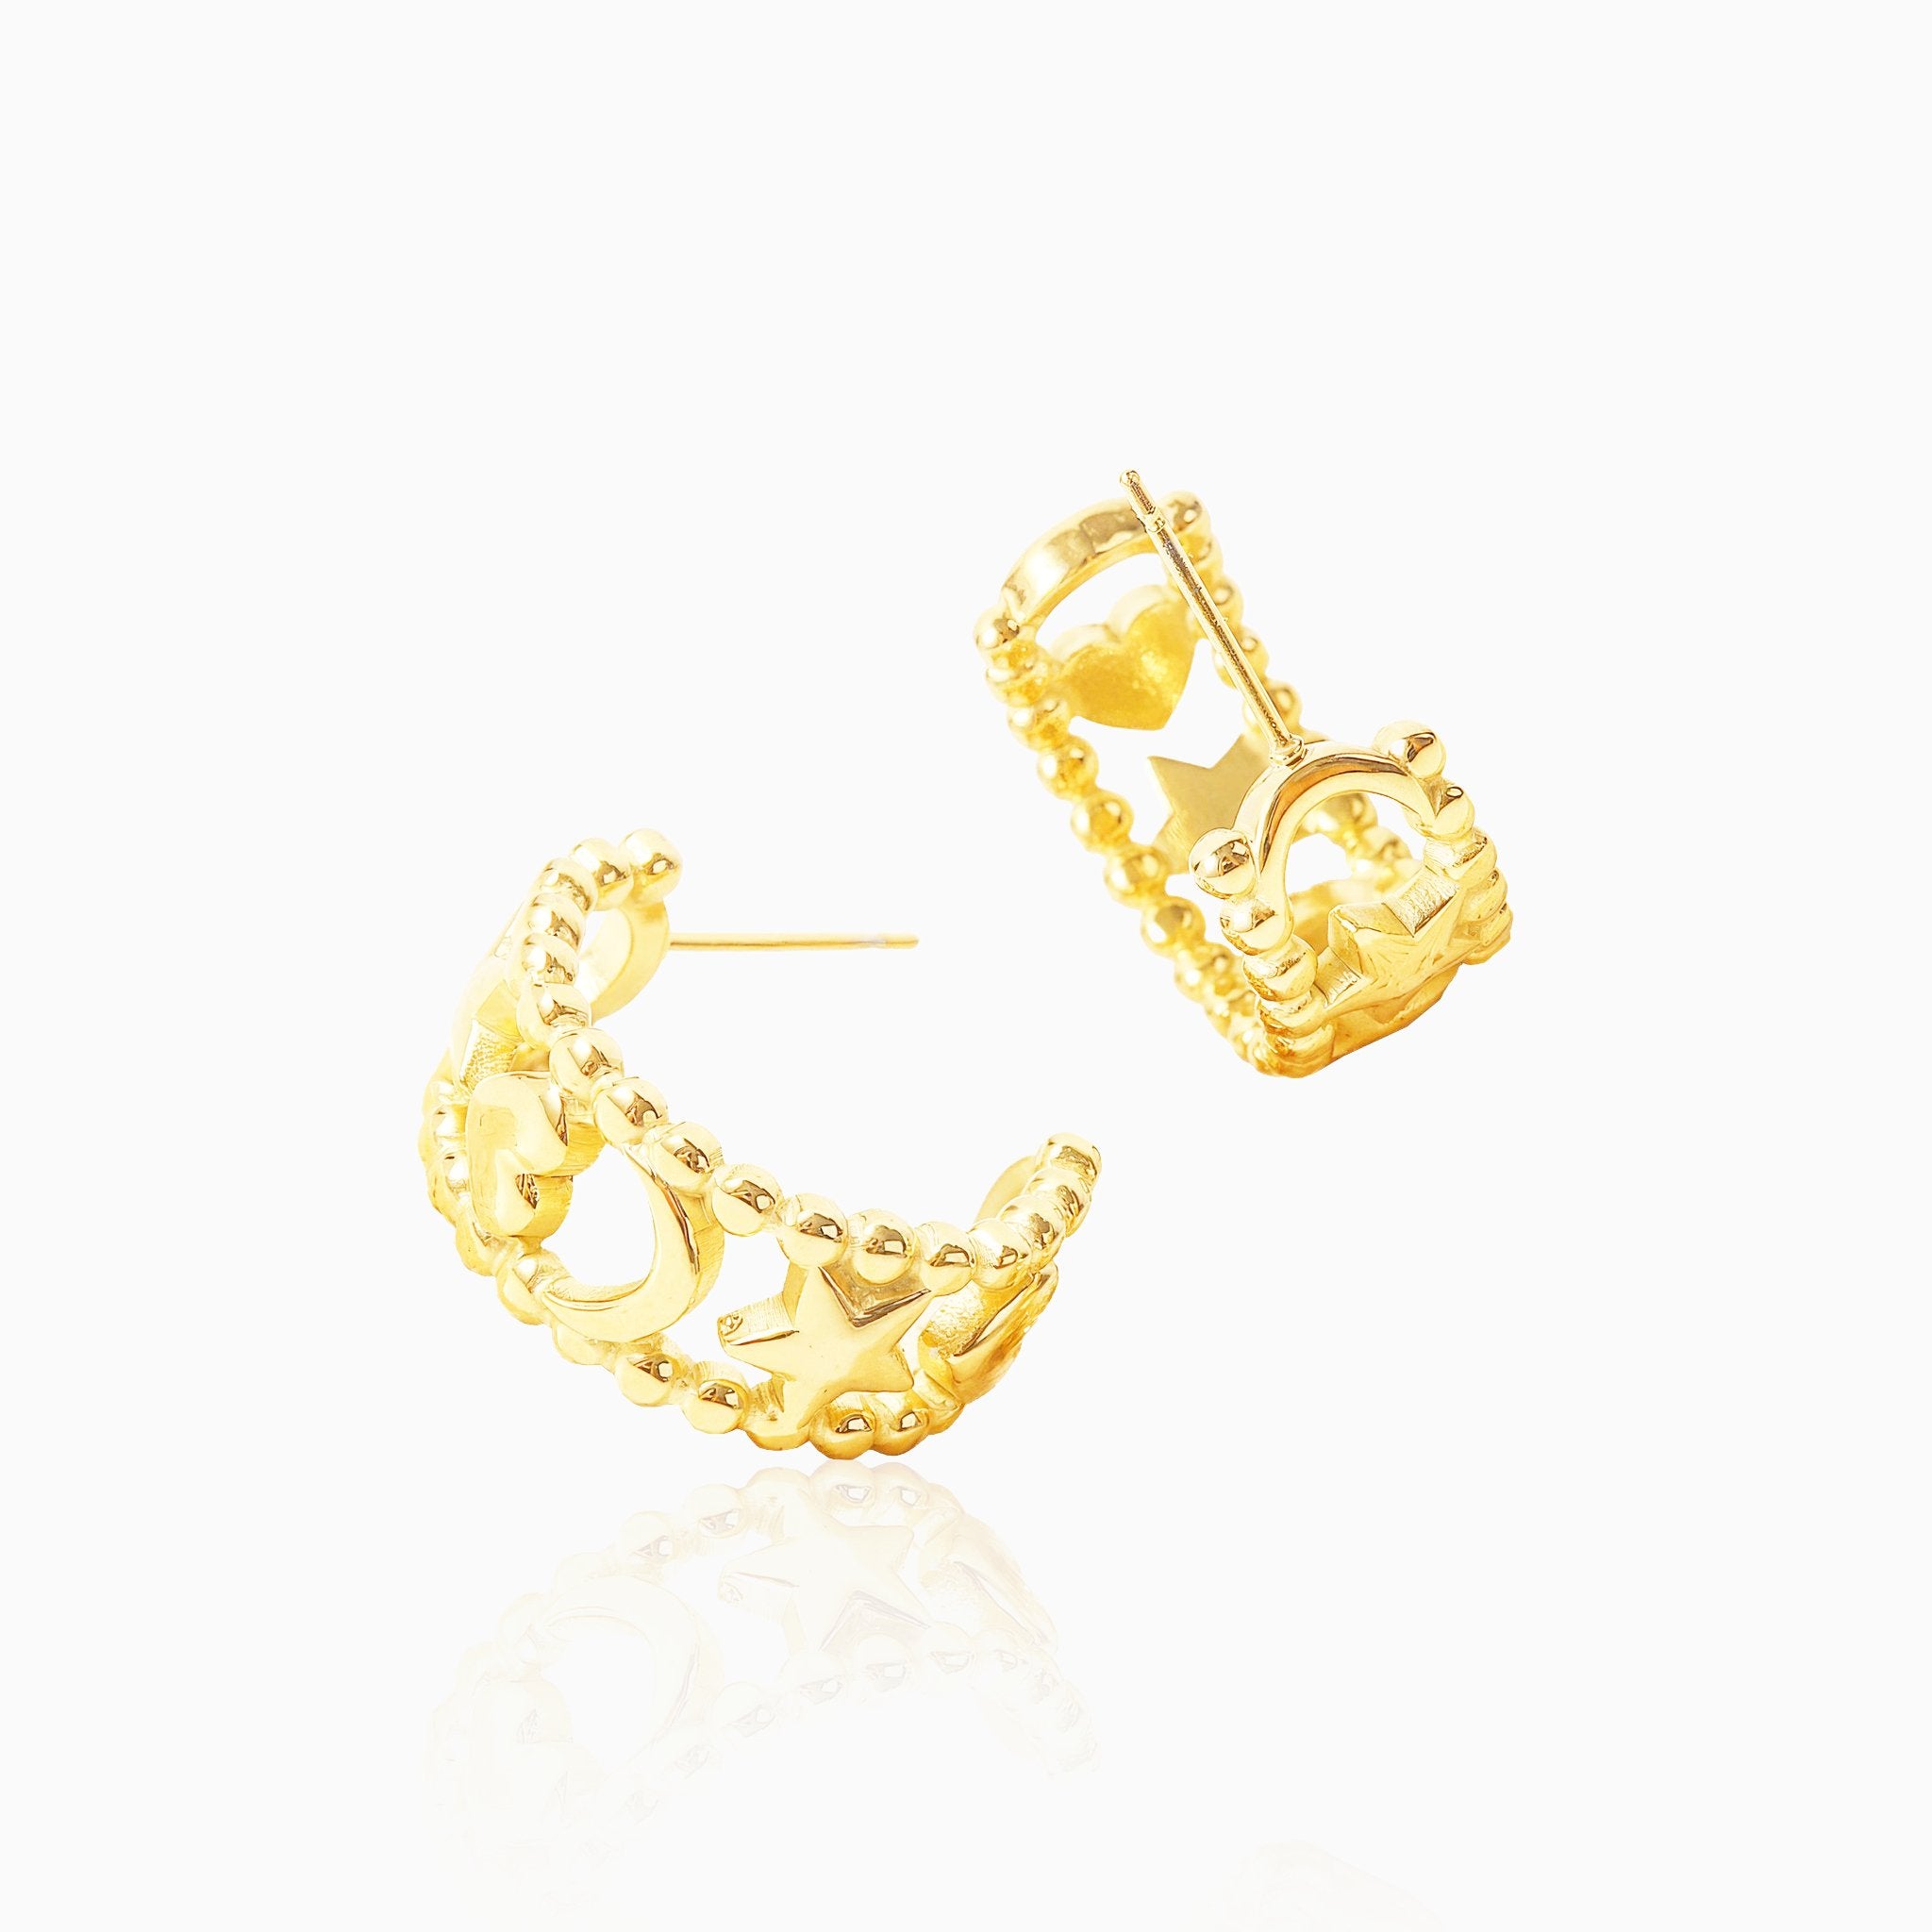 Retro C-Shaped Earrings - Nobbier - Earrings - 18K Gold And Titanium PVD Coated Jewelry